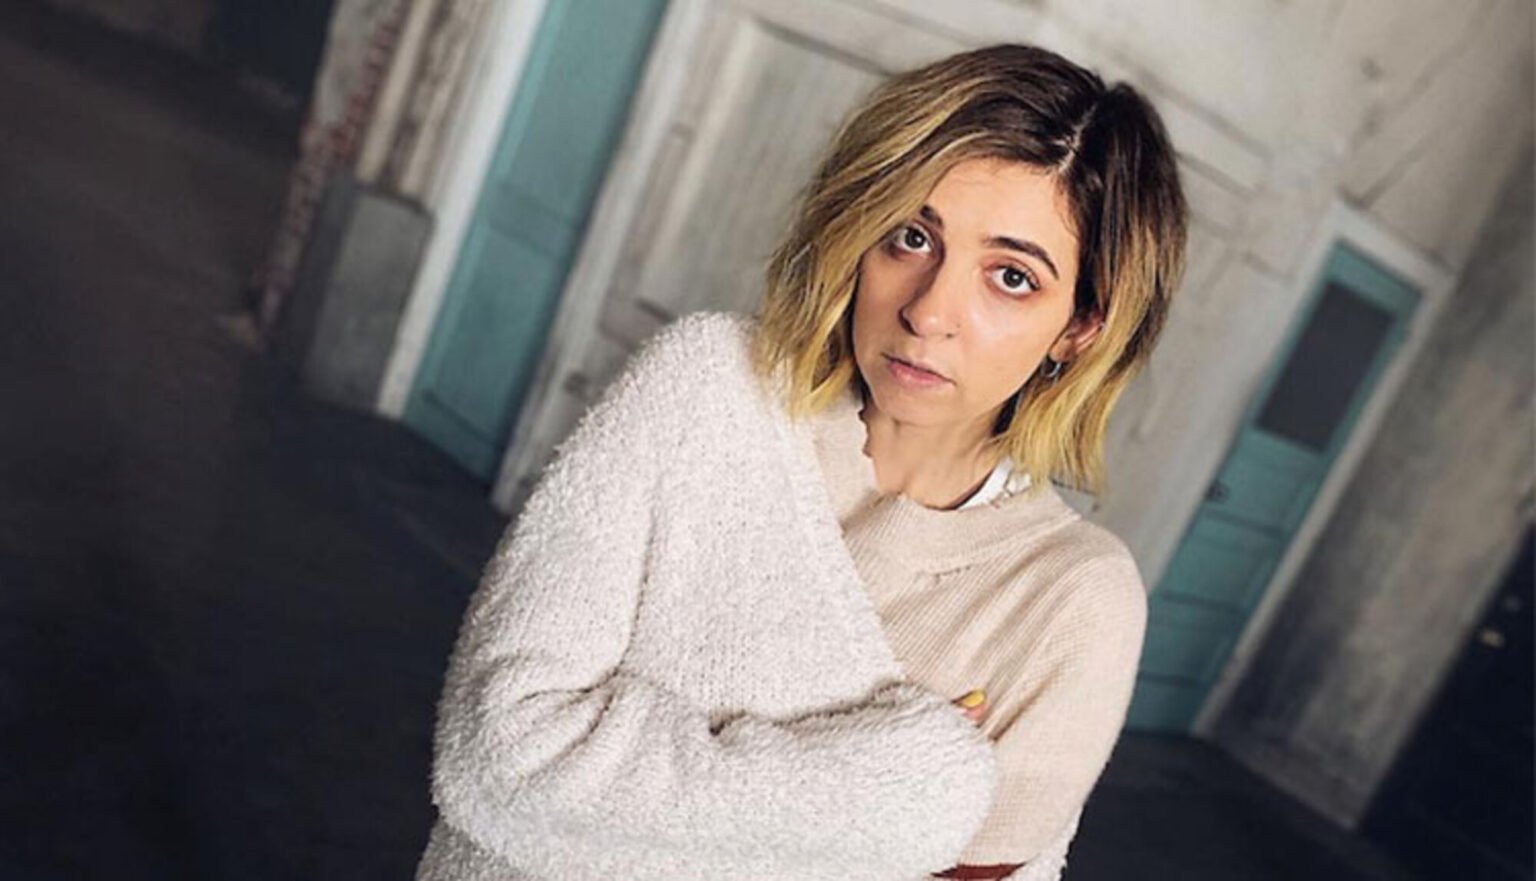 If you keep up with influencer news, then we're sure you've heard all about Gabbie Hanna and the controversy over her poems. Let's take a look at them here.